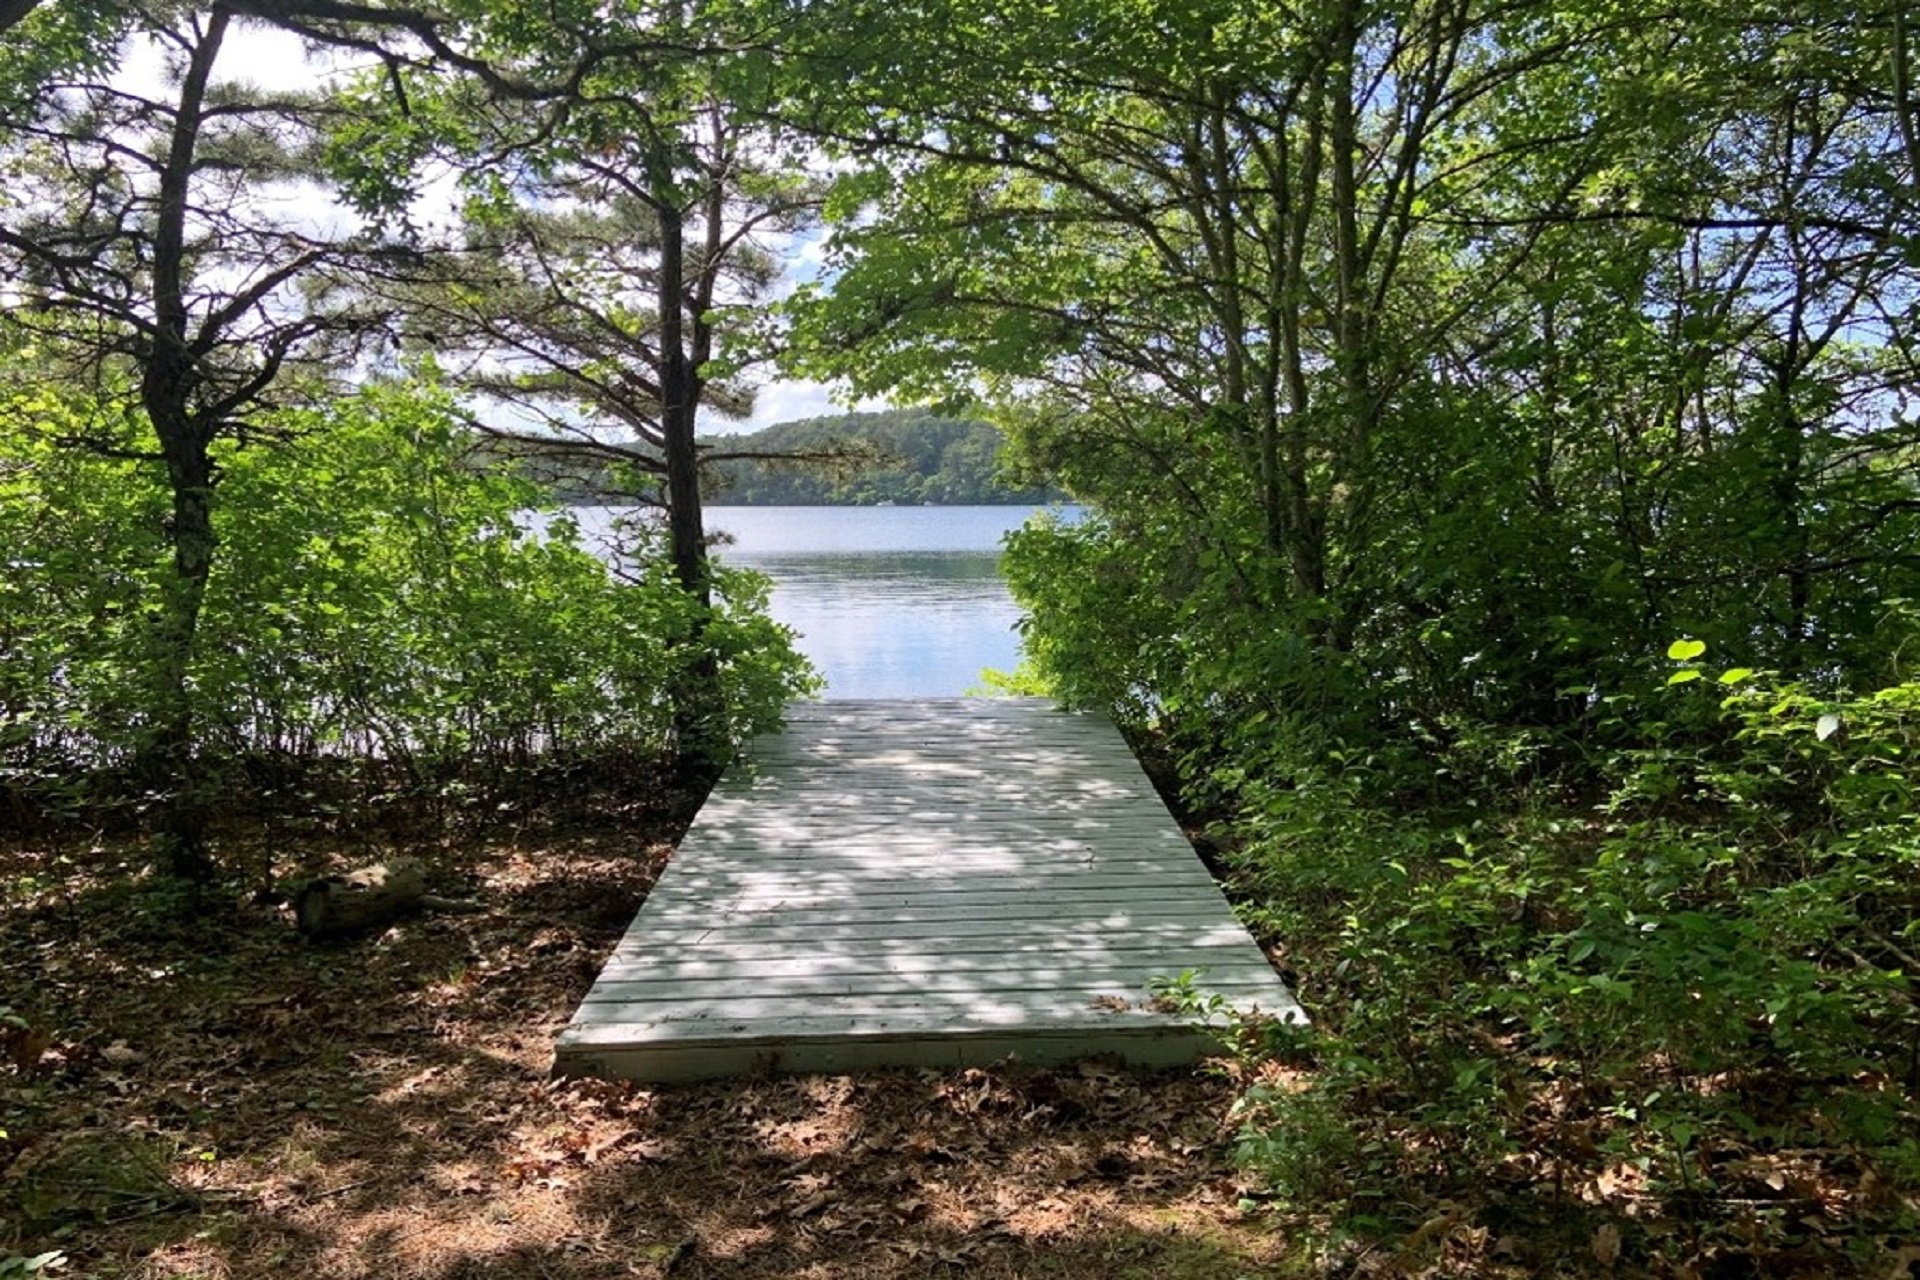 View through the trees toward the water at the site of the former Cape Cod Sea Camps